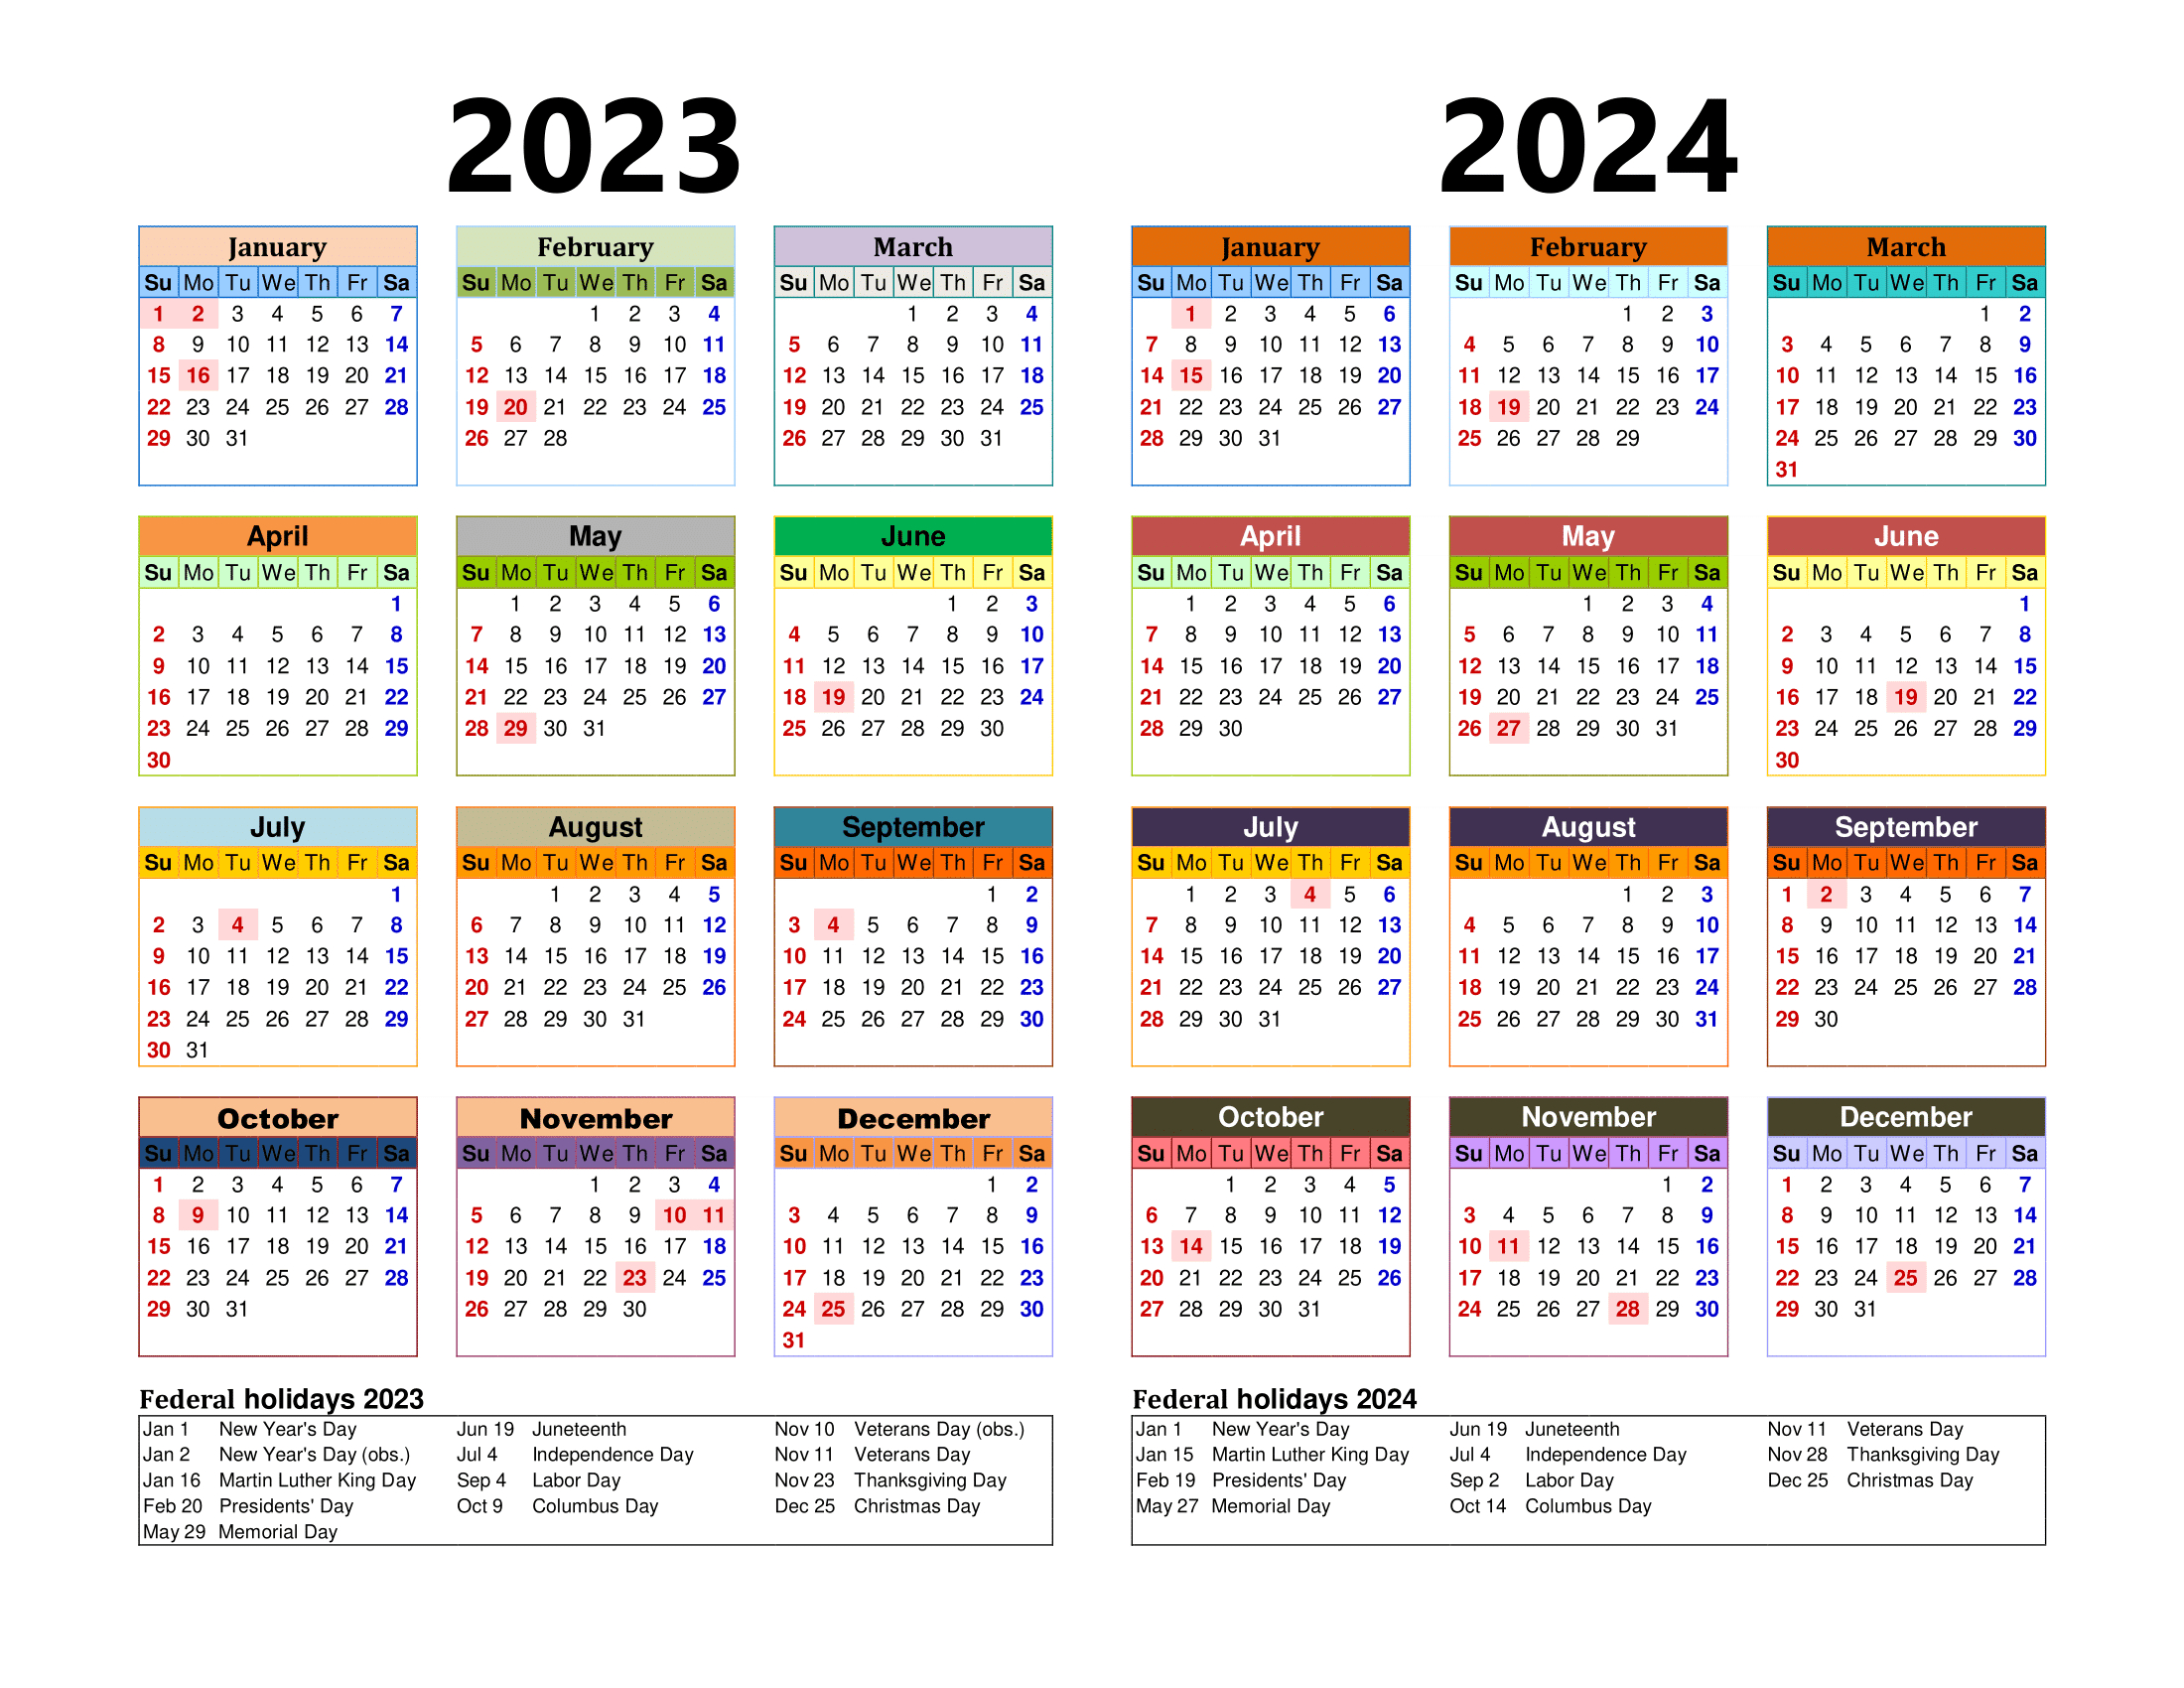 Free Printable Two Year Calendar Templates For 2023 And 2024 In Pdf | August 2023 To July 2024 Calendar Printable